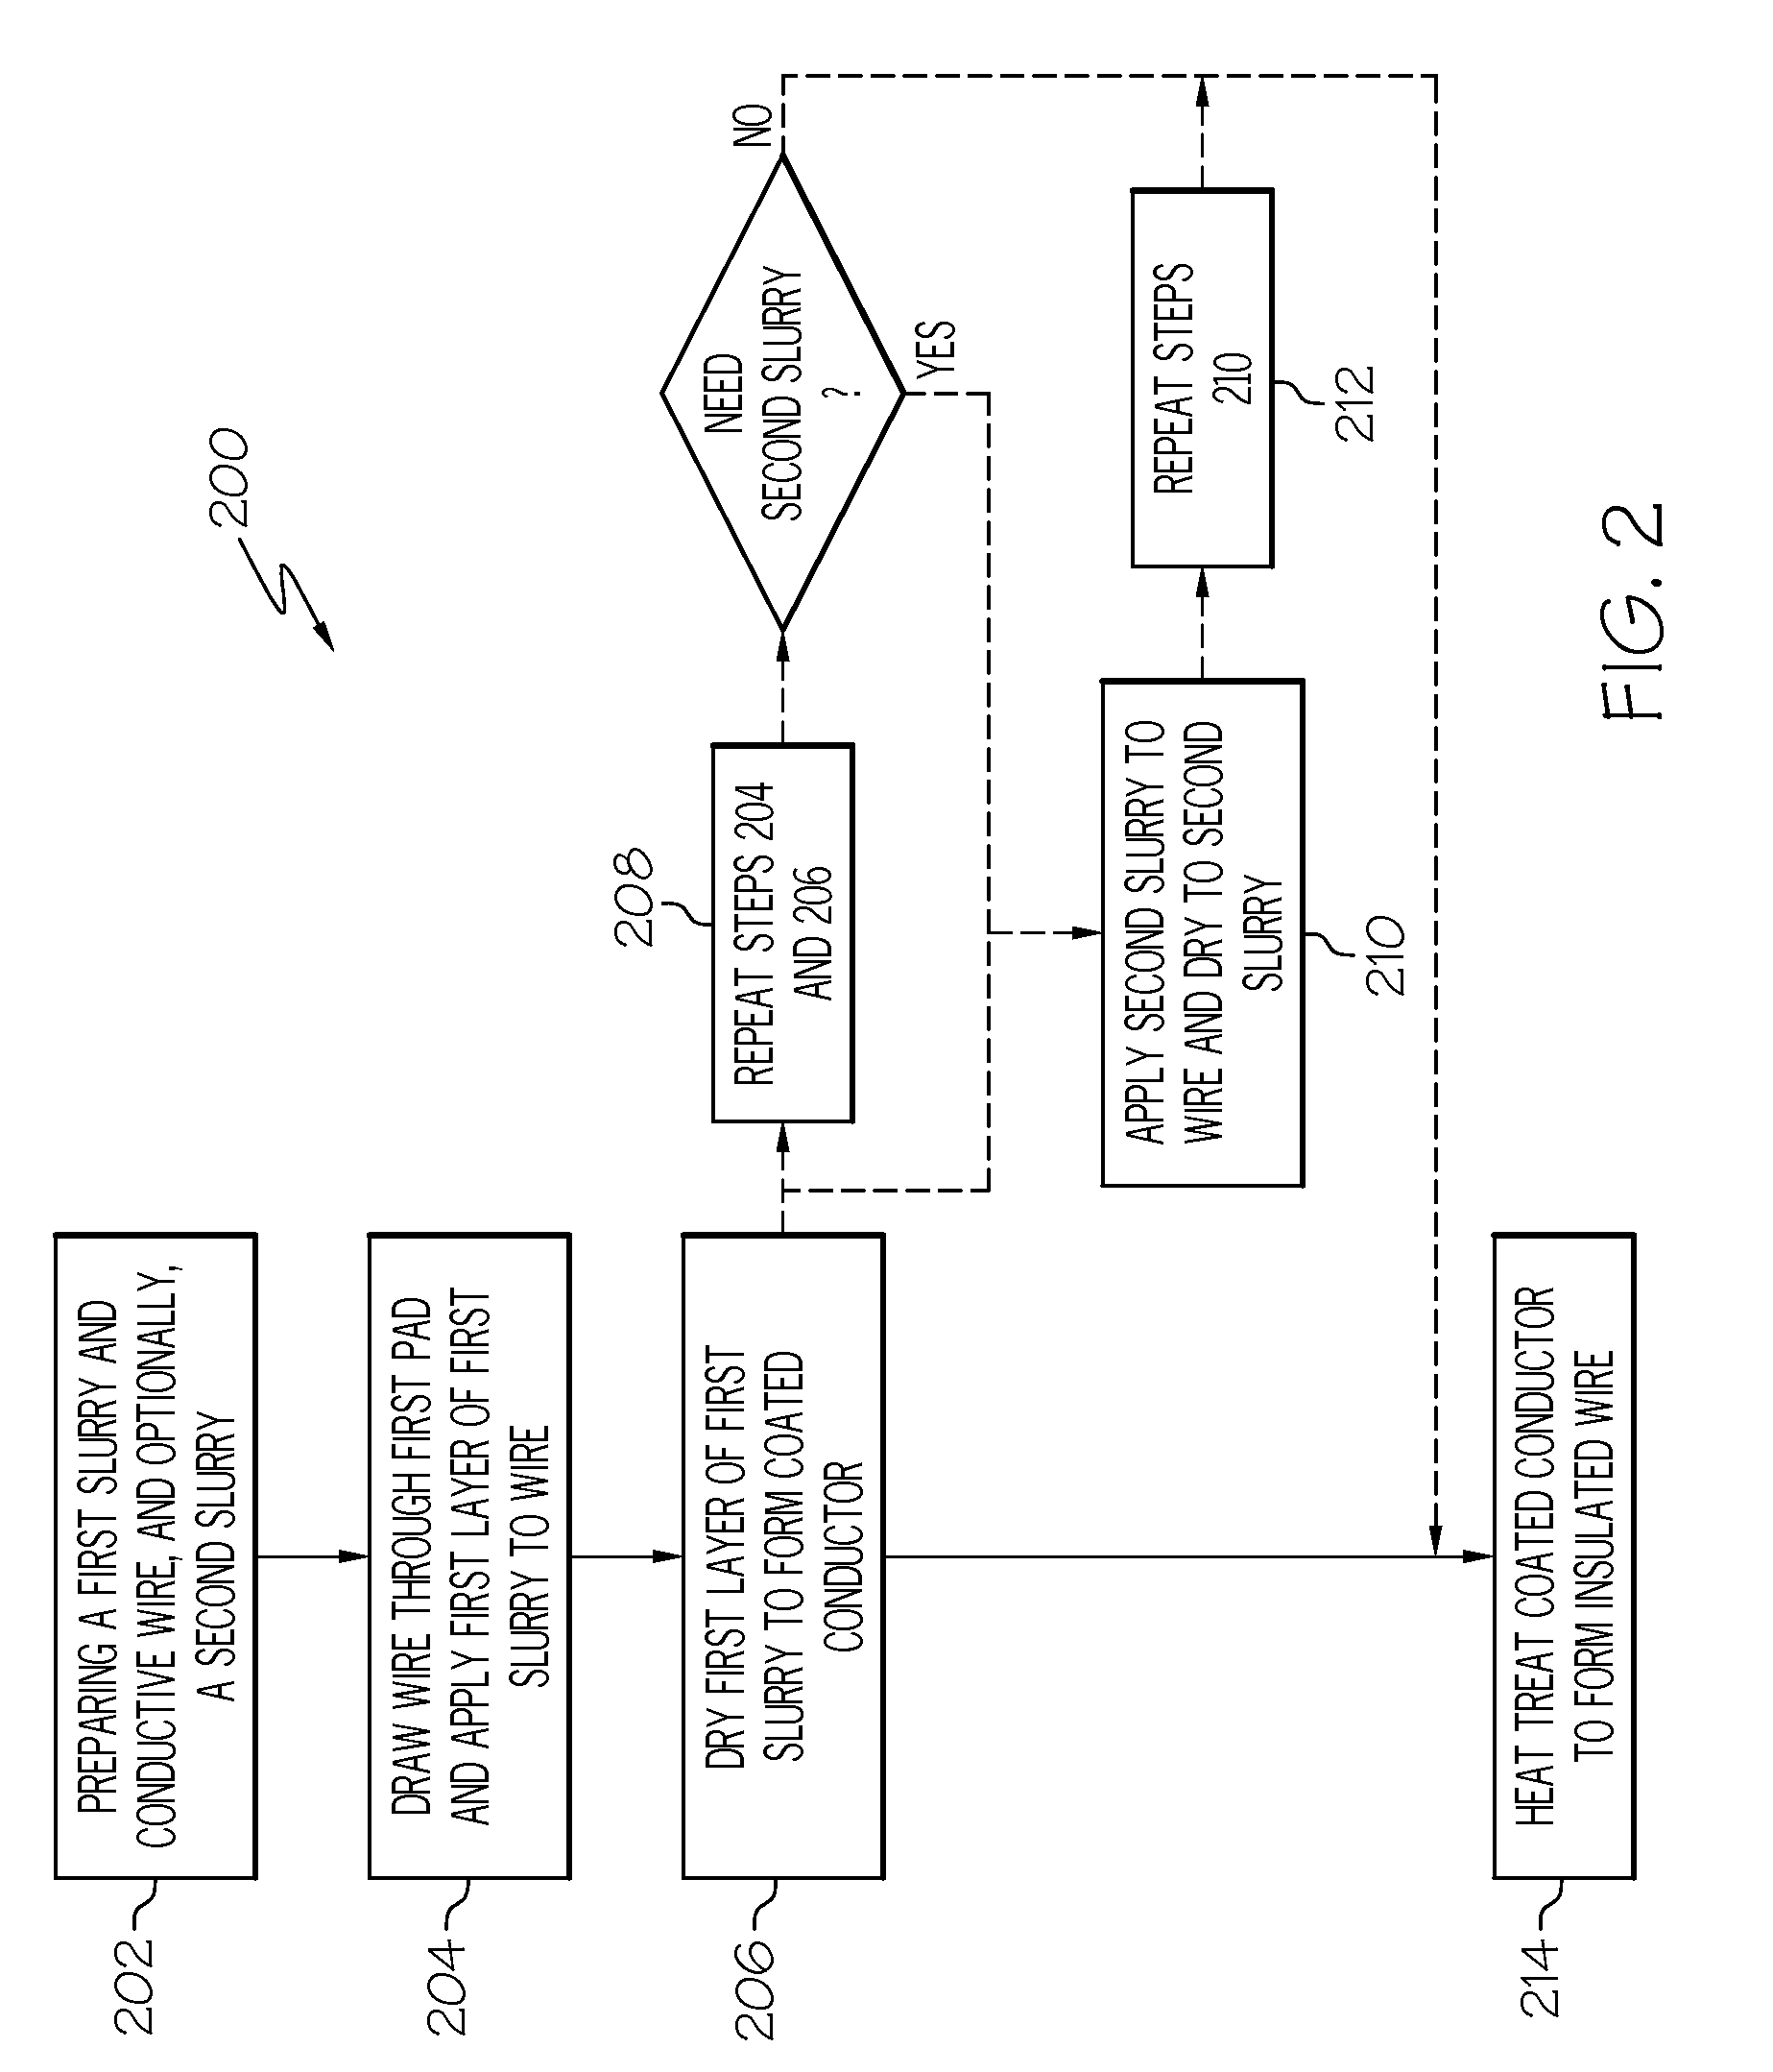 Methods of manufacturing flexible insulated wires